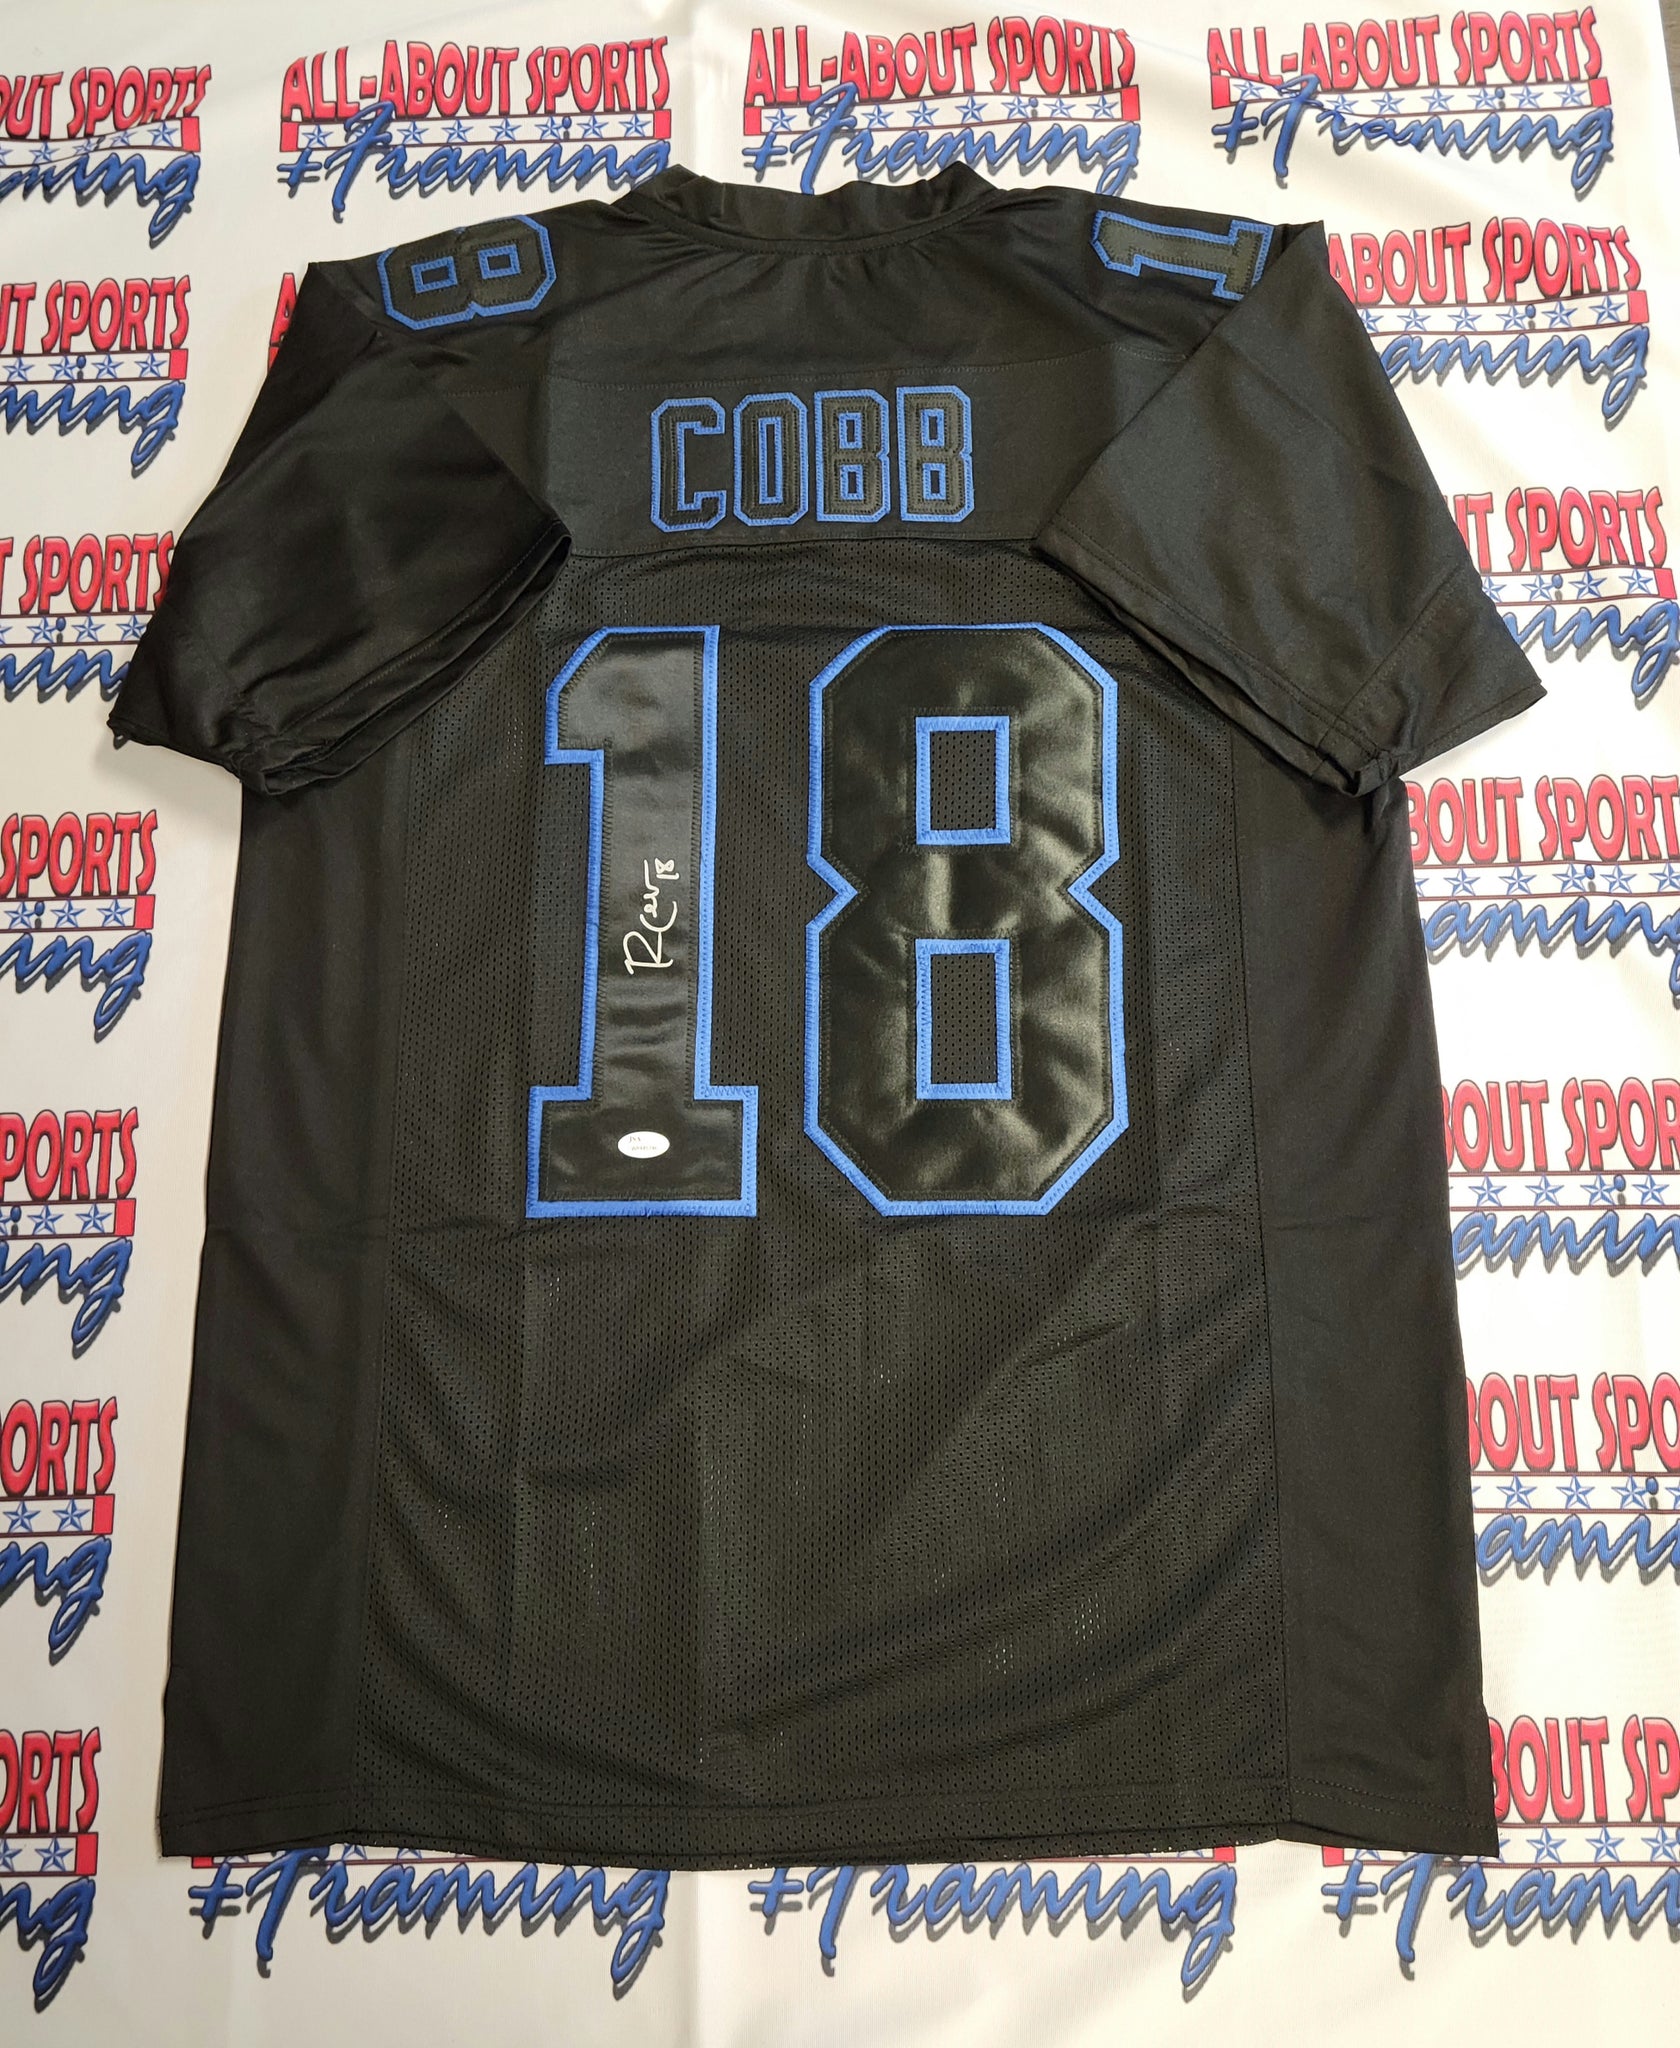 Randall Cobb Authentic Signed Pro Style Jersey Autographed JSA